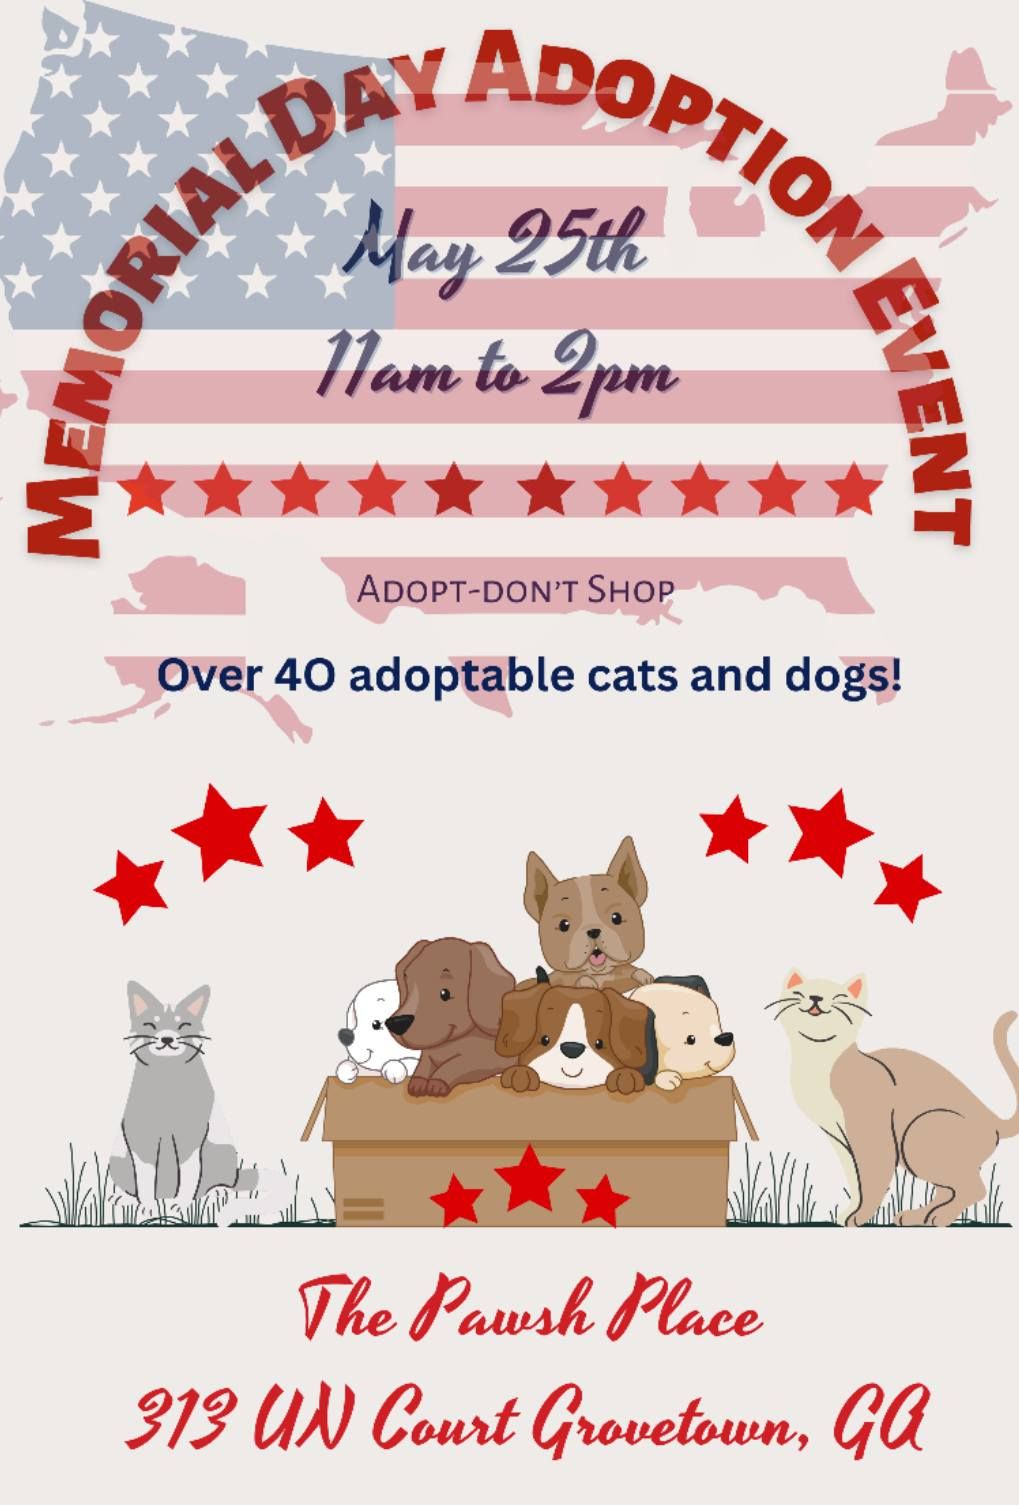 Join Us for a Special Adoption Event Memorial Day Weekend!